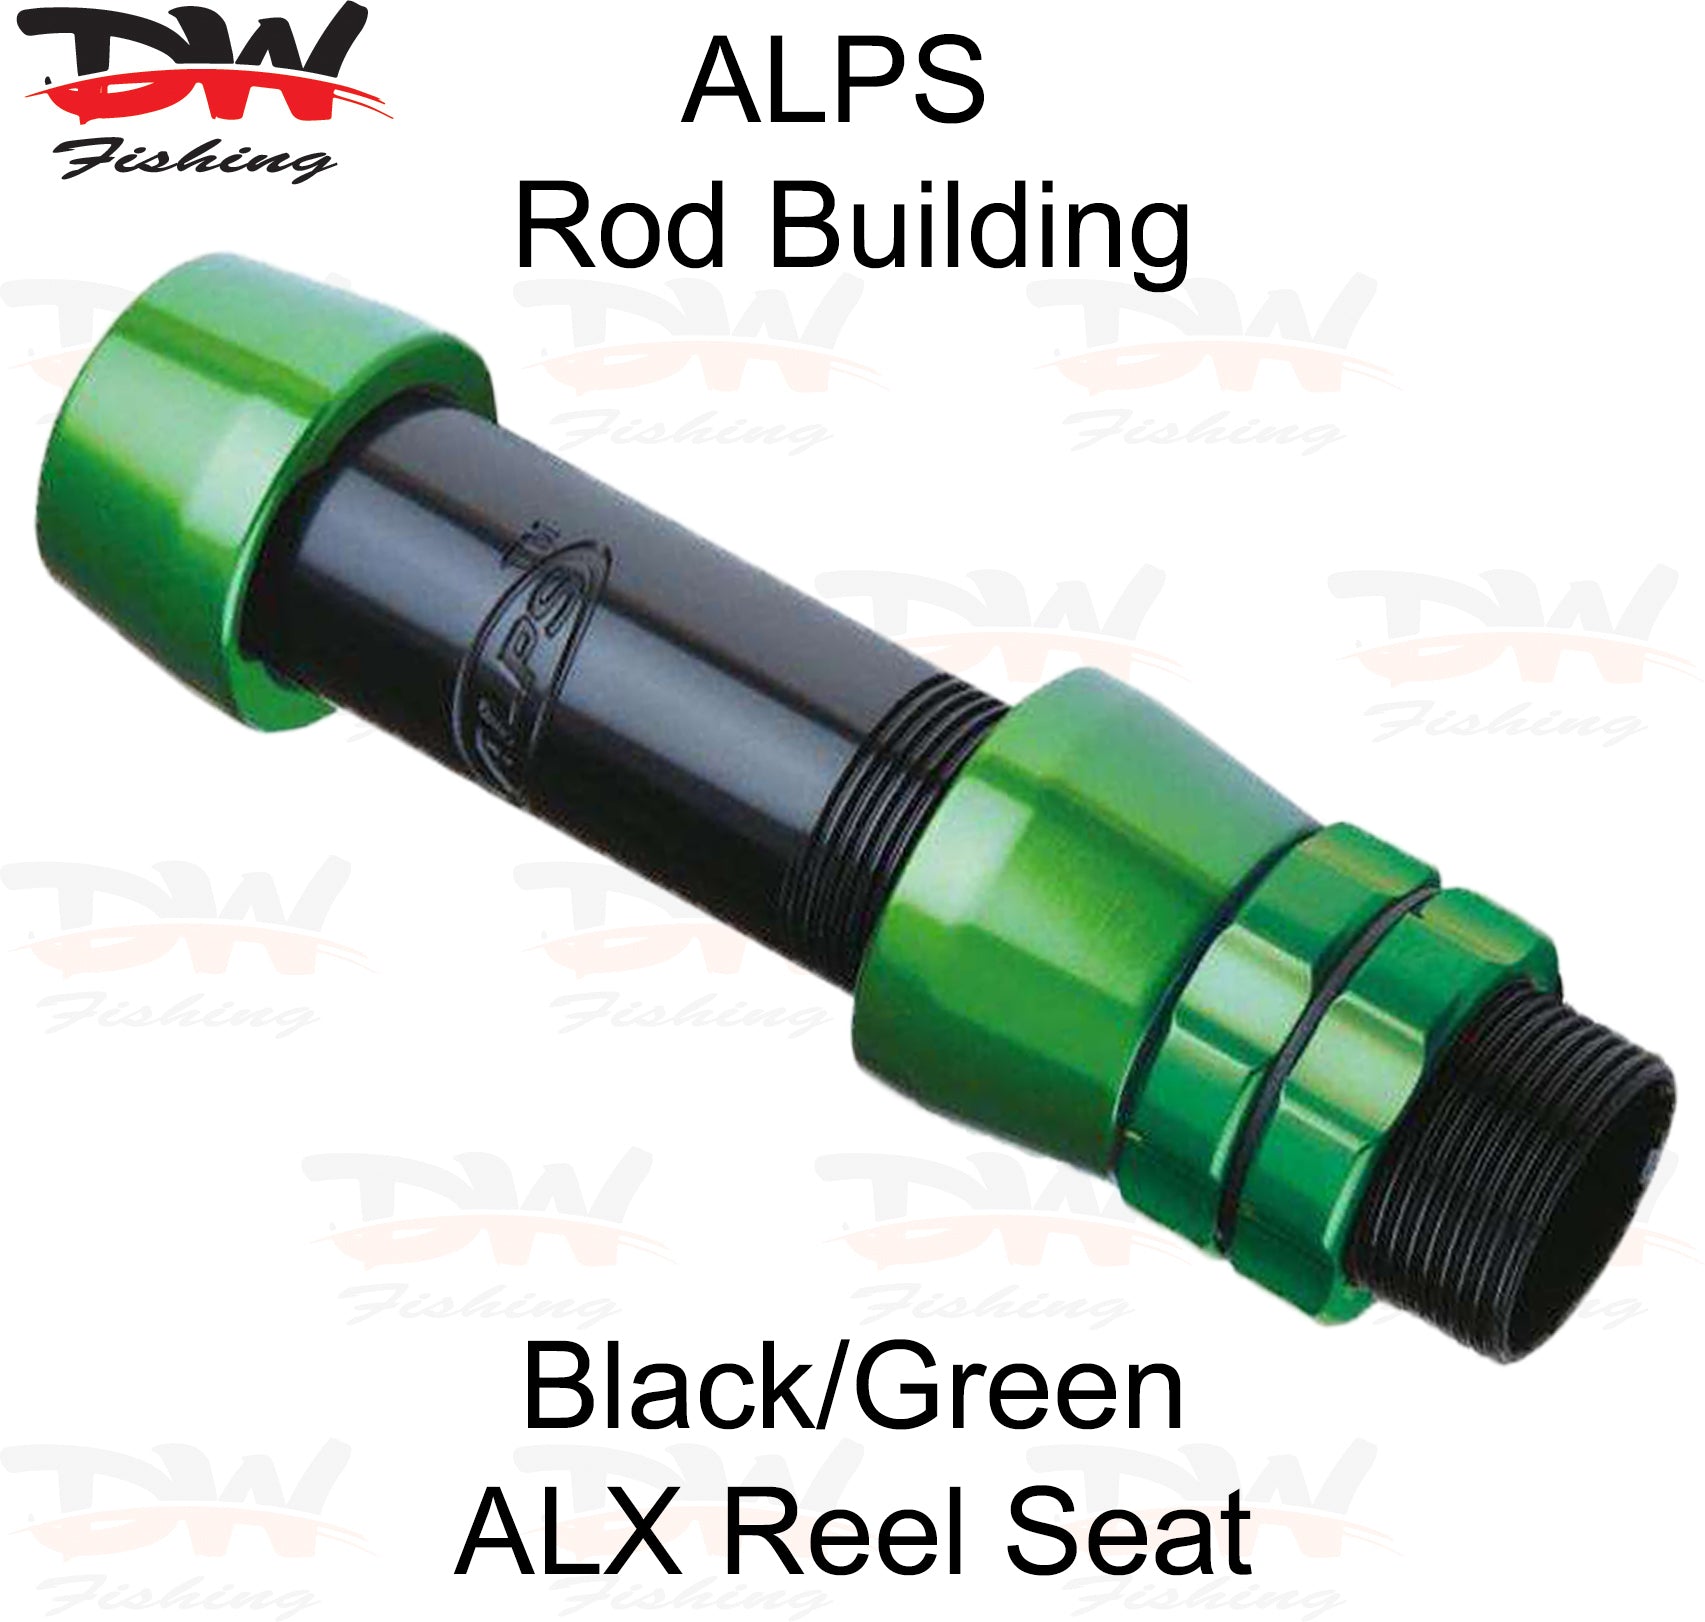 ALPS ALX Alloy Reel seat black and green colour salt water reel seat